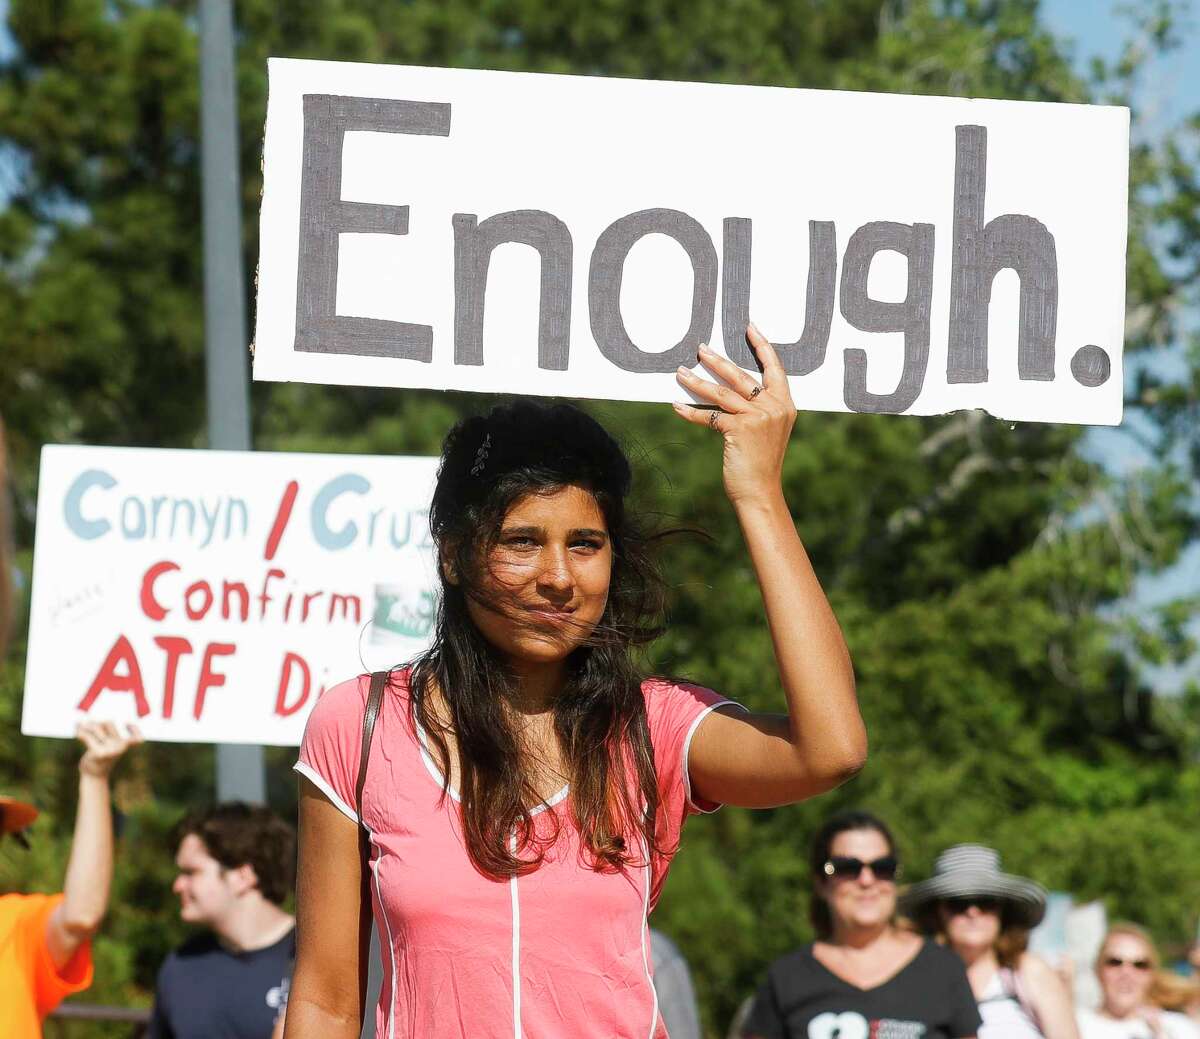 A protester hold a sign that reads “Enough” during a March for Our Lives rally at Northshore Park, Saturday, June 11, 2022, in The Woodlands. The organization held more than a dozen rallies statewide this weekend in response to the mass shooting at a Uvalde elementary school where 19 children and two teachers were shot to death. March for Our Lives started in 2018 following the shooting at Majory Stoneman Douglas High School in Parkland, Fla., and rallies in support of new gun safety laws.